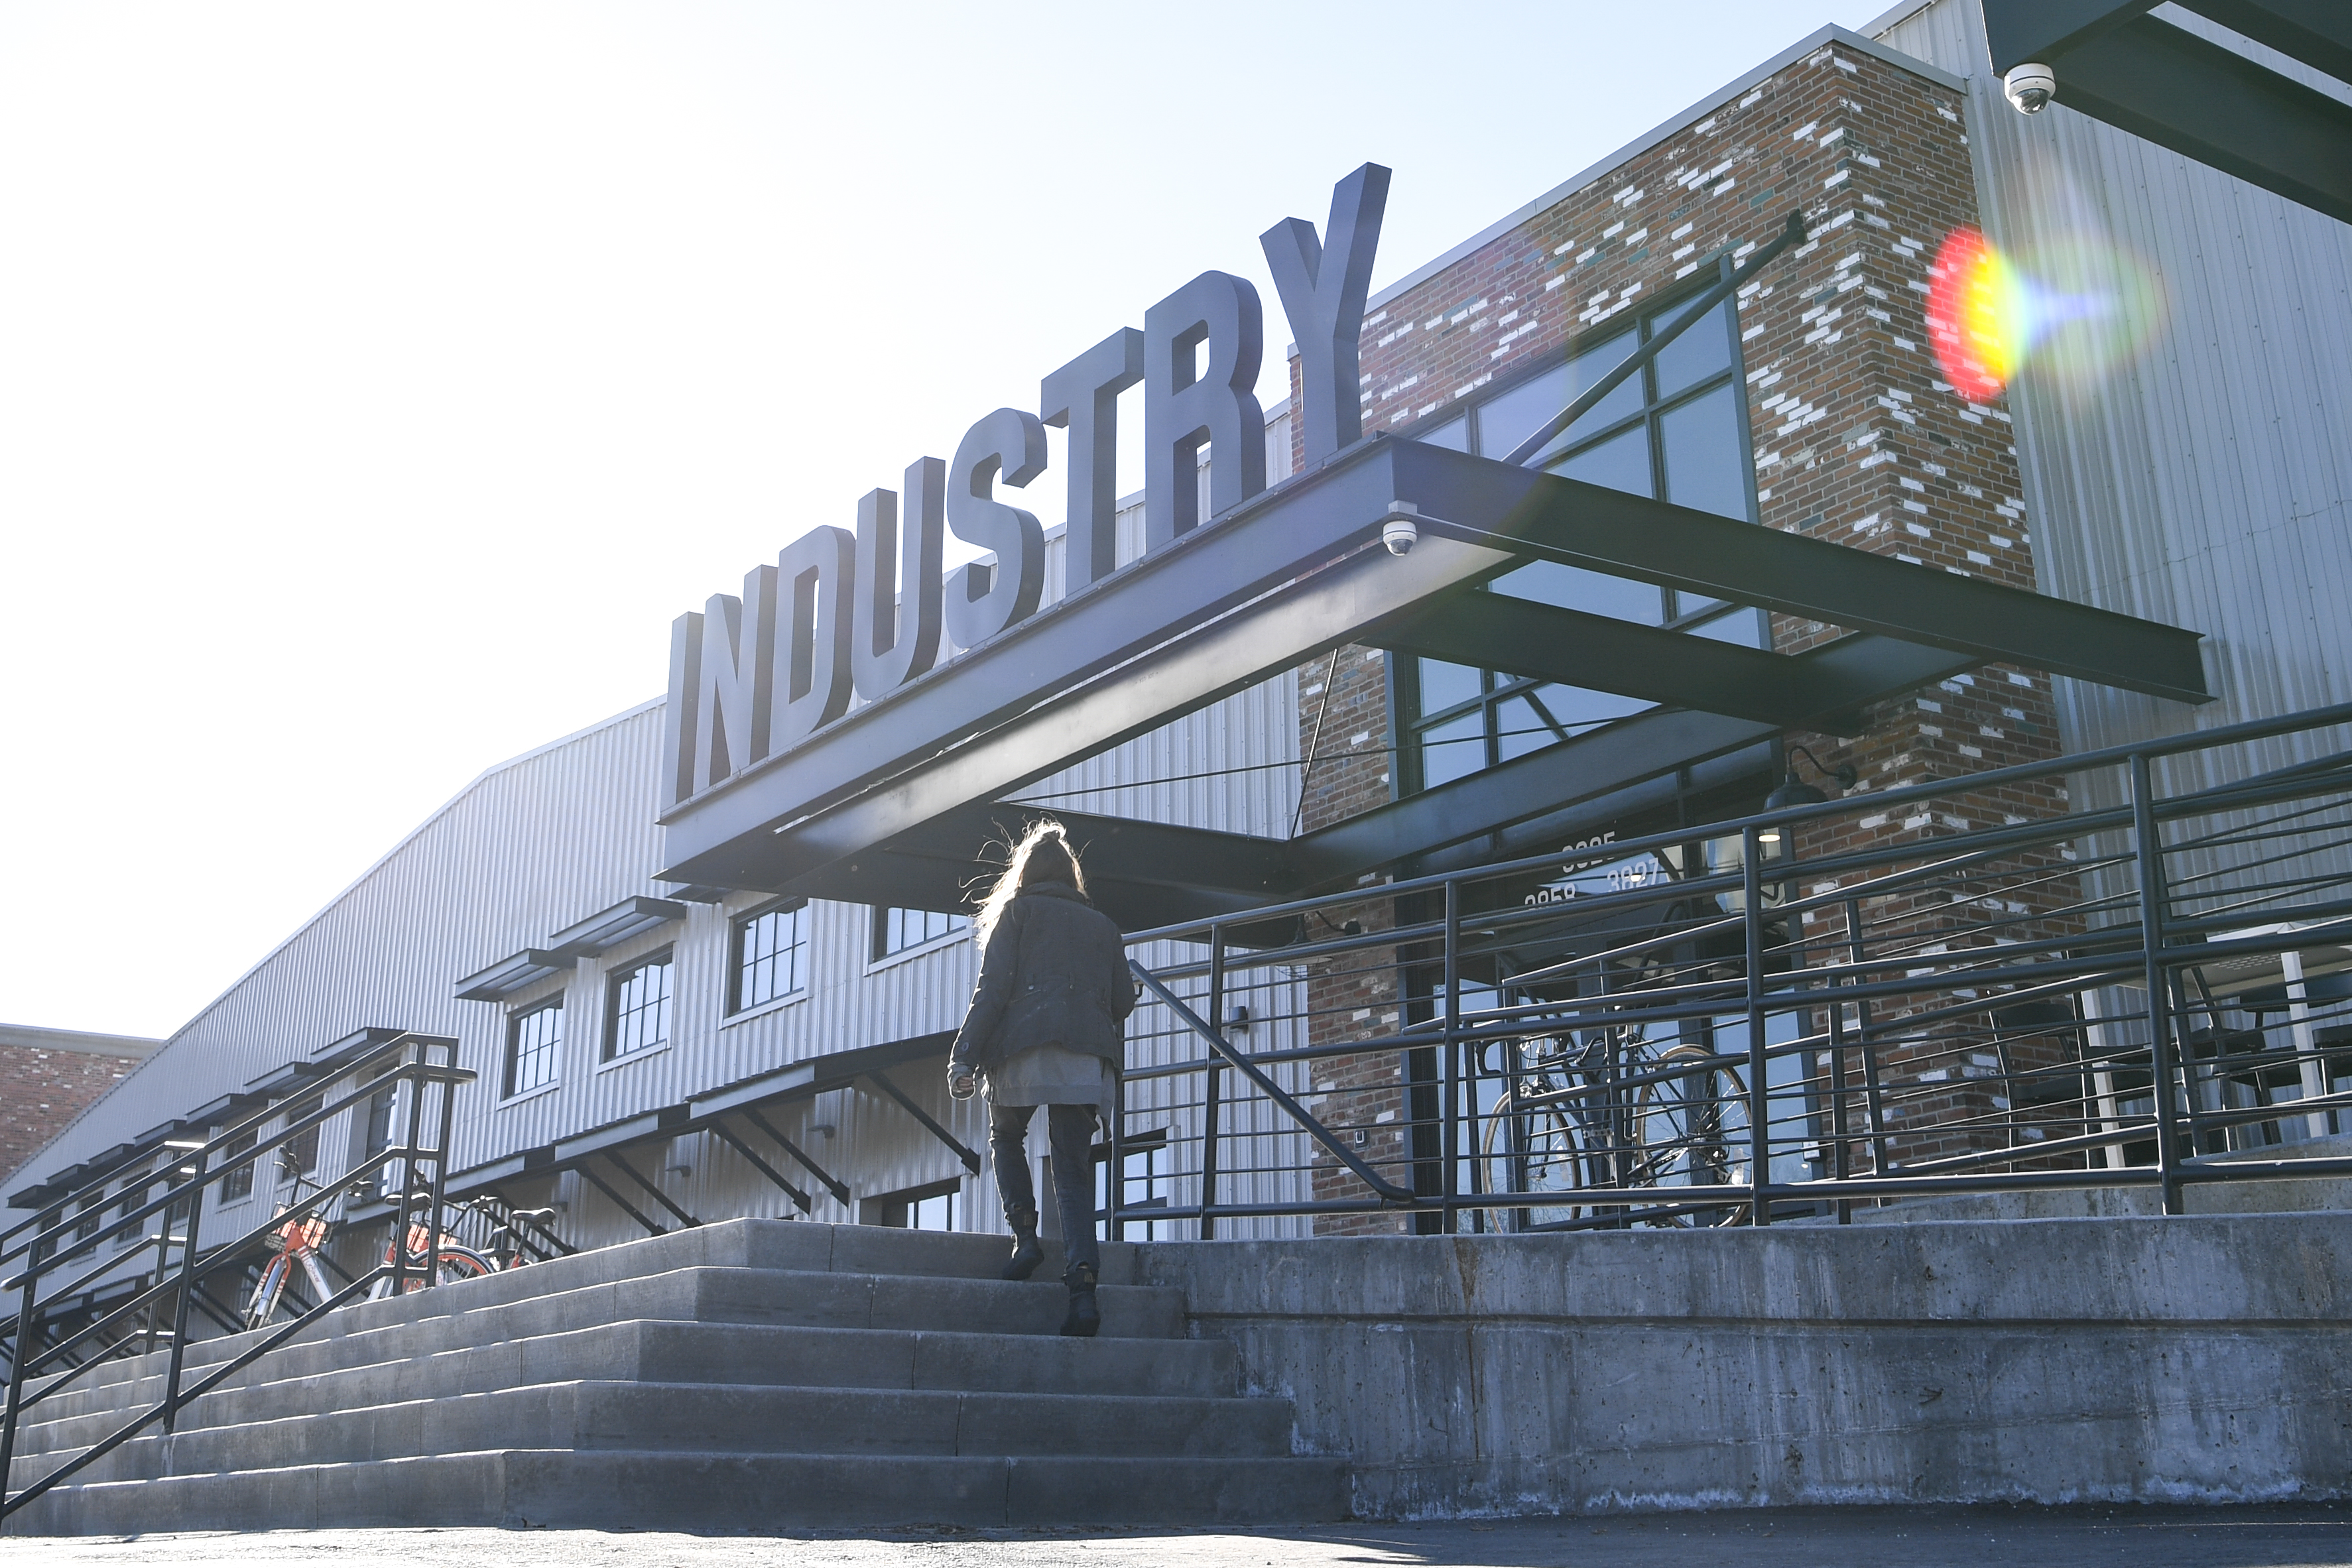 A photo of the exterior of the Industry Building in RiNo, with steps leading up to the building and large signage spelling out “Industry” visible